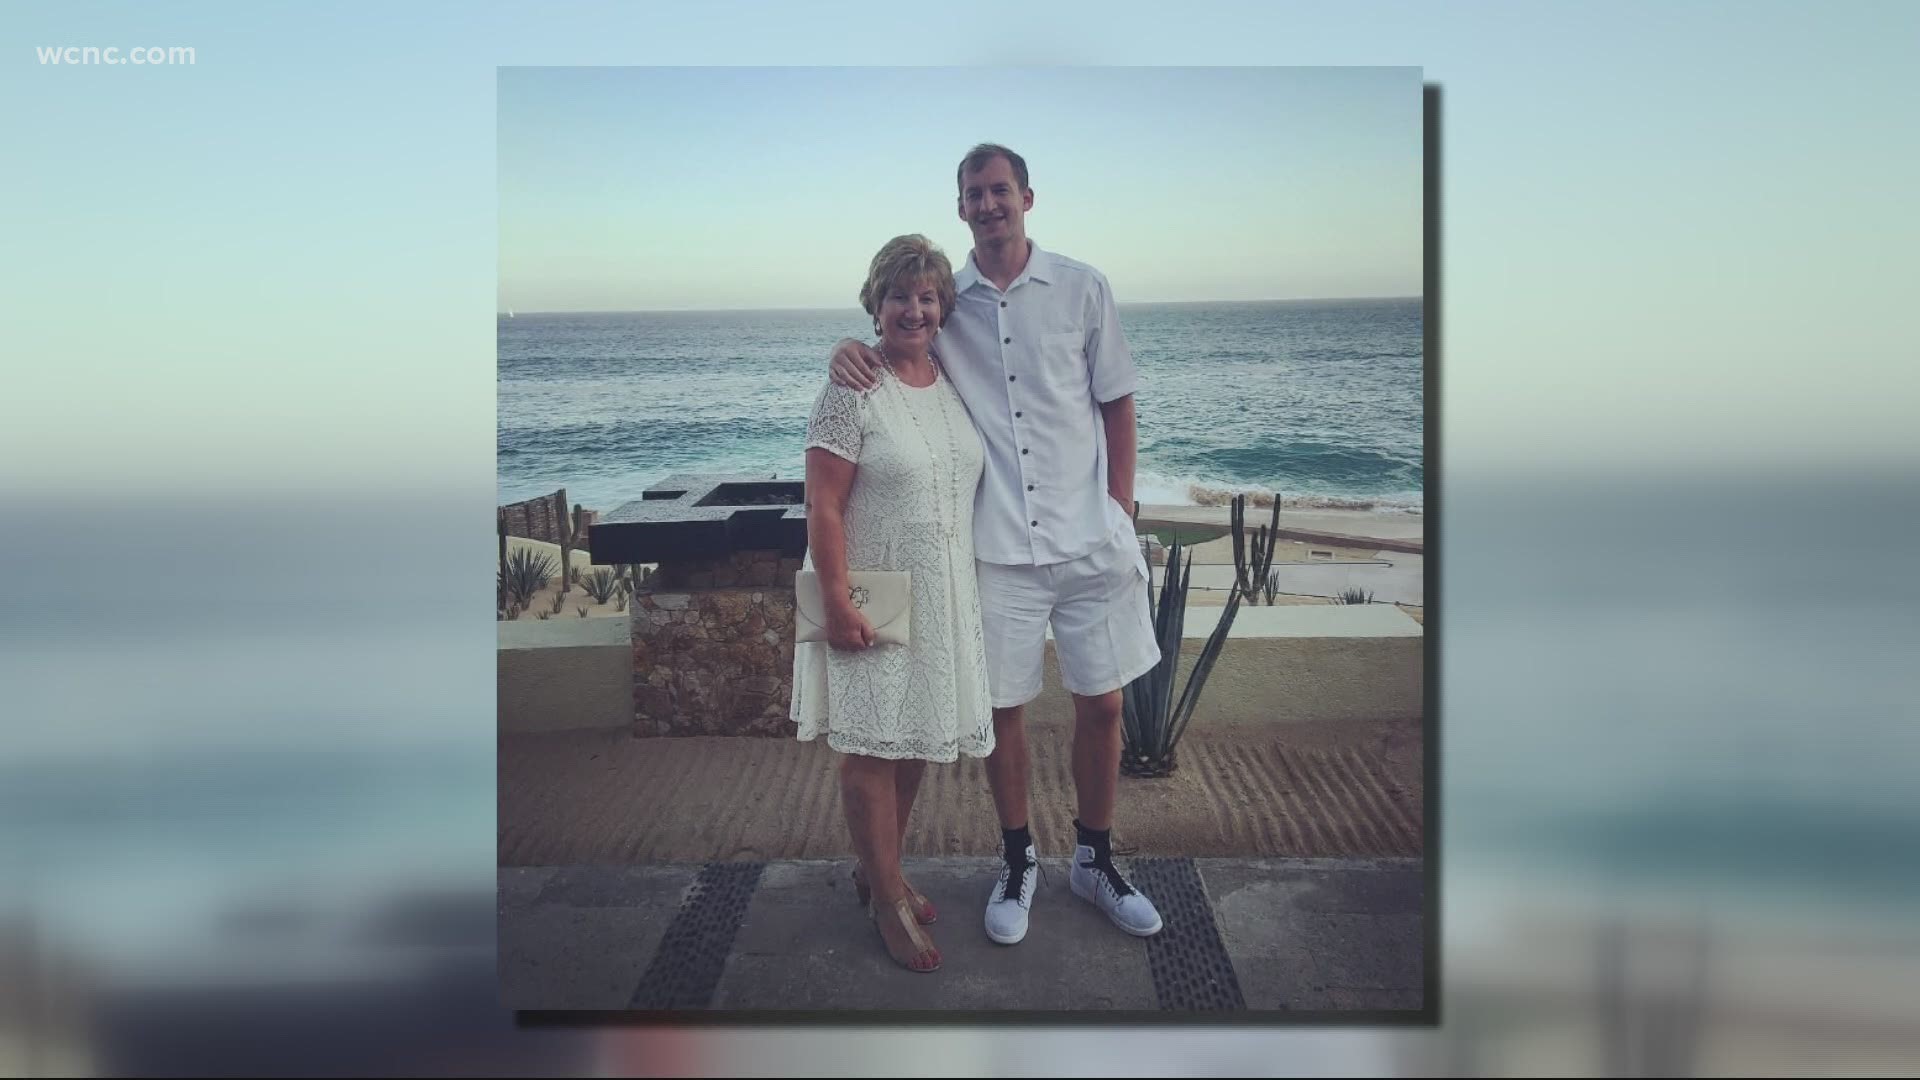 On Mother's Day Cody Zeller of the Charlotte Hornets isn't able to visit his mom, but he was able to visit during Easter and said they played a lot of board games.